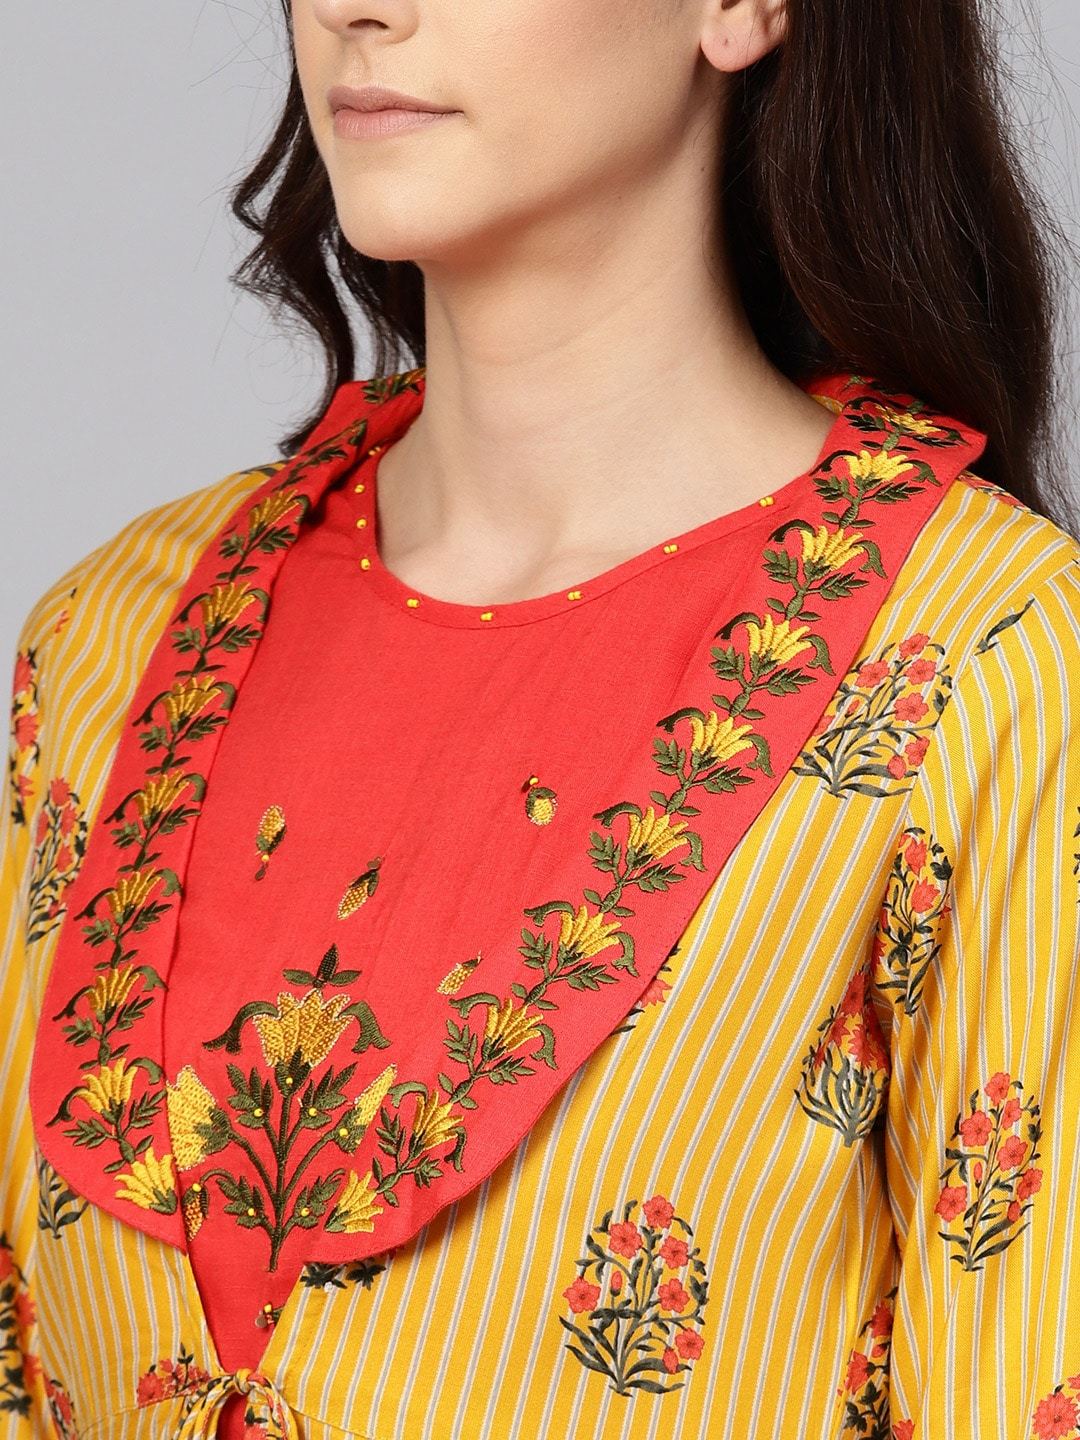 Women's Orange & Mustard Yellow Embroidered Crop Top with Trousers & Ehtnic Jacket - Meeranshi